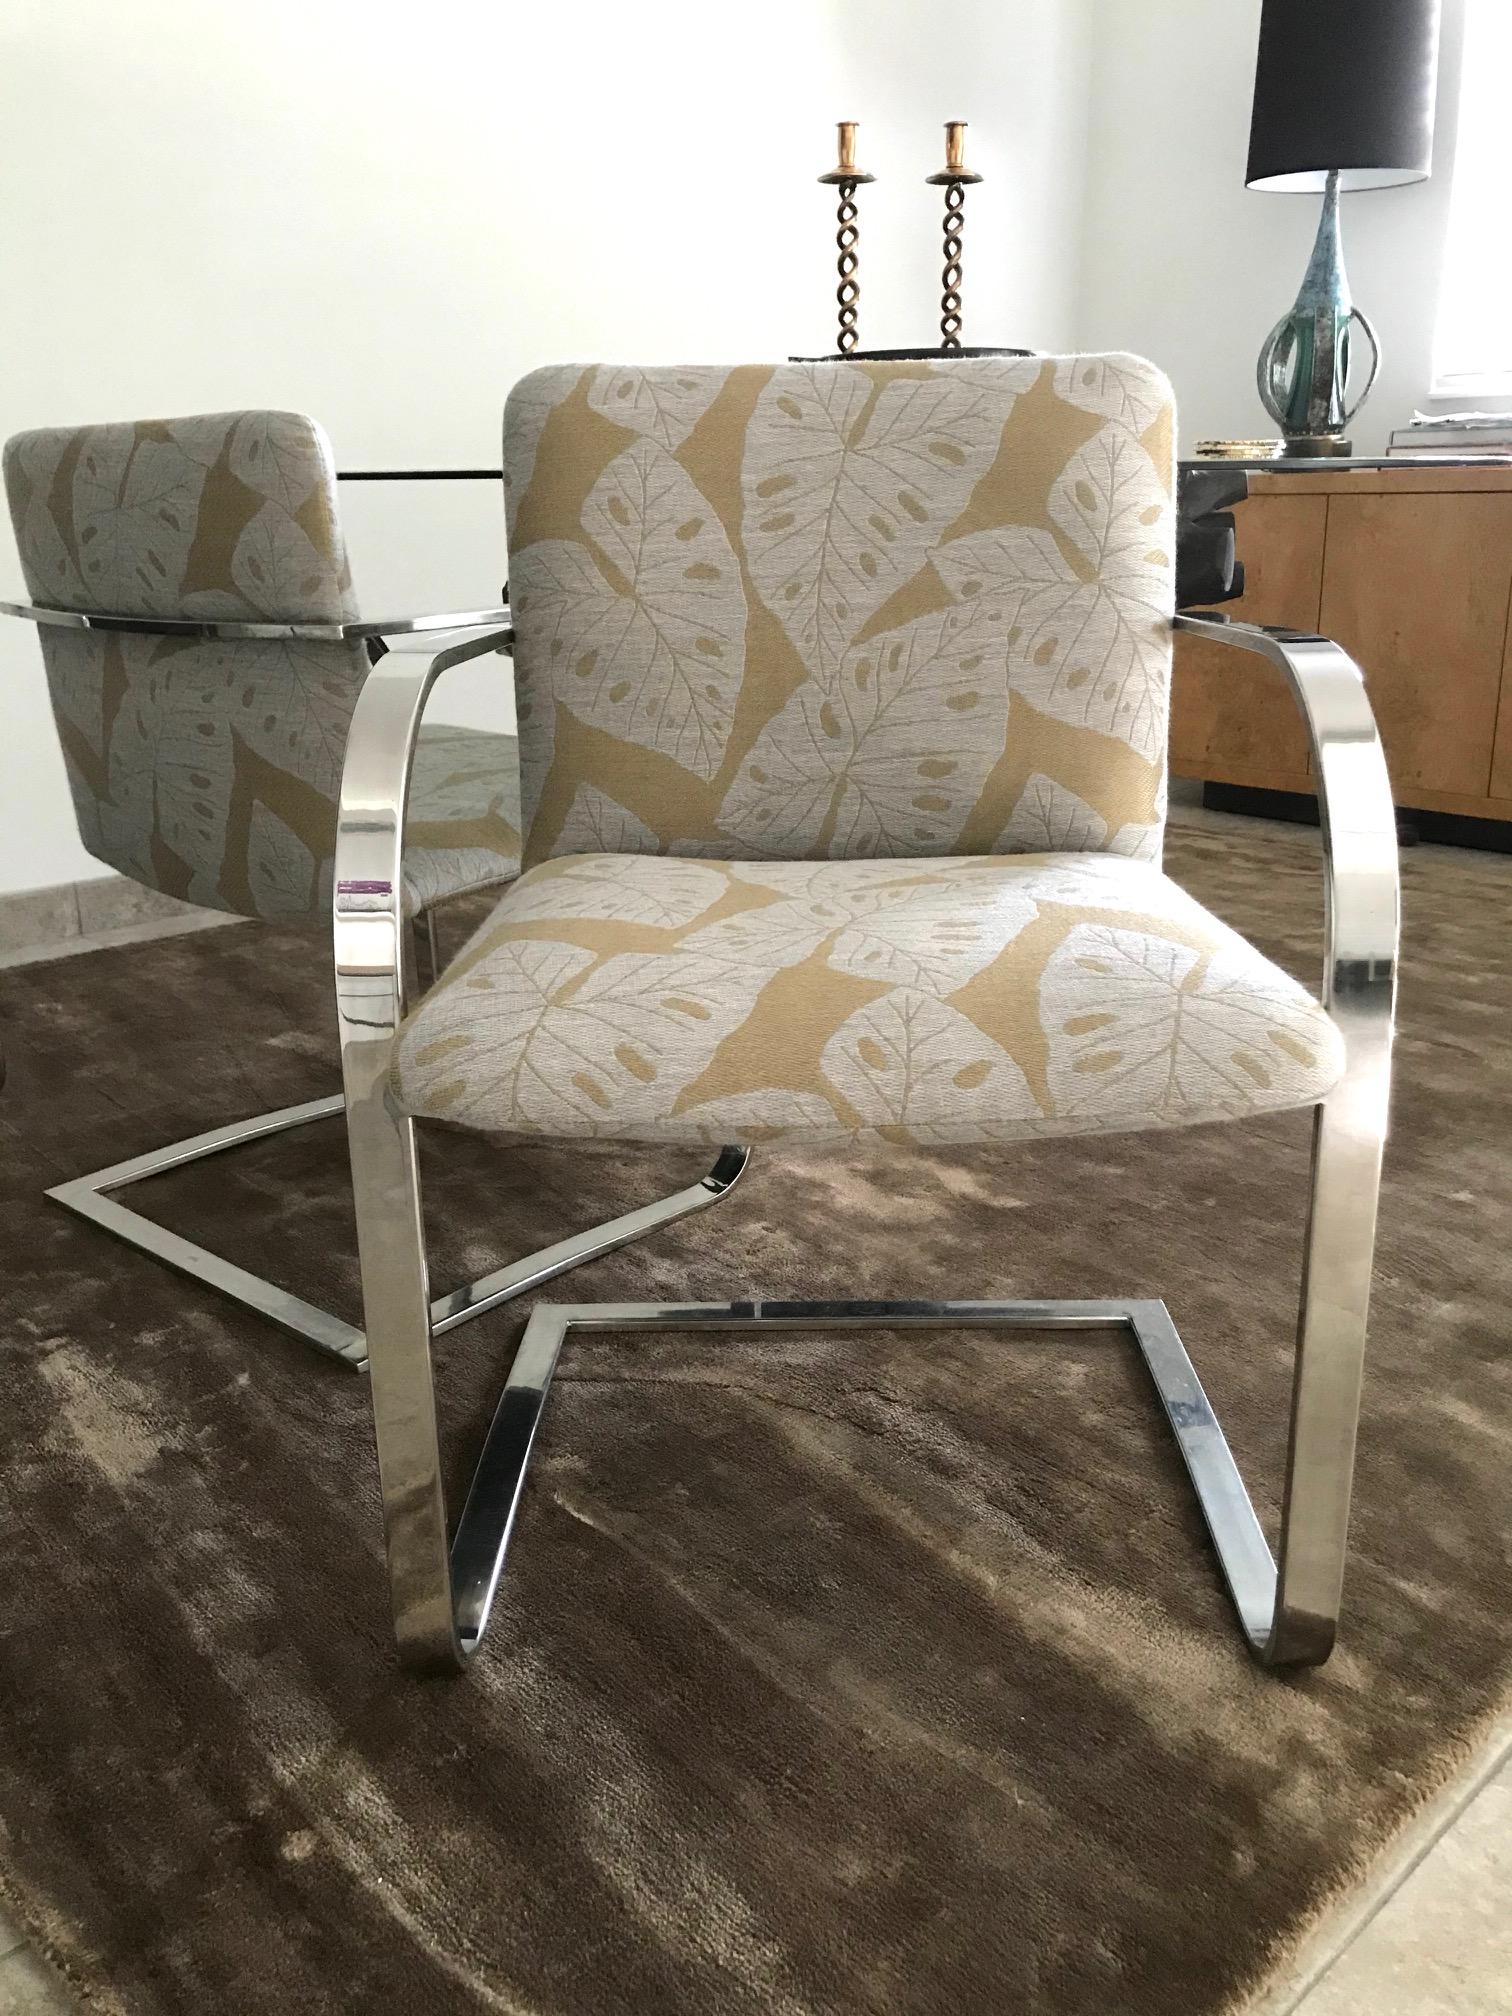 Mid-Century Modern desk chair or side chair with cantilevered steel frame in chrome. Chair has streamlined profile with curved armrests and floating seat design. Newly upholstered in handwoven fabric with bold tropical leaf print in hues of taupe